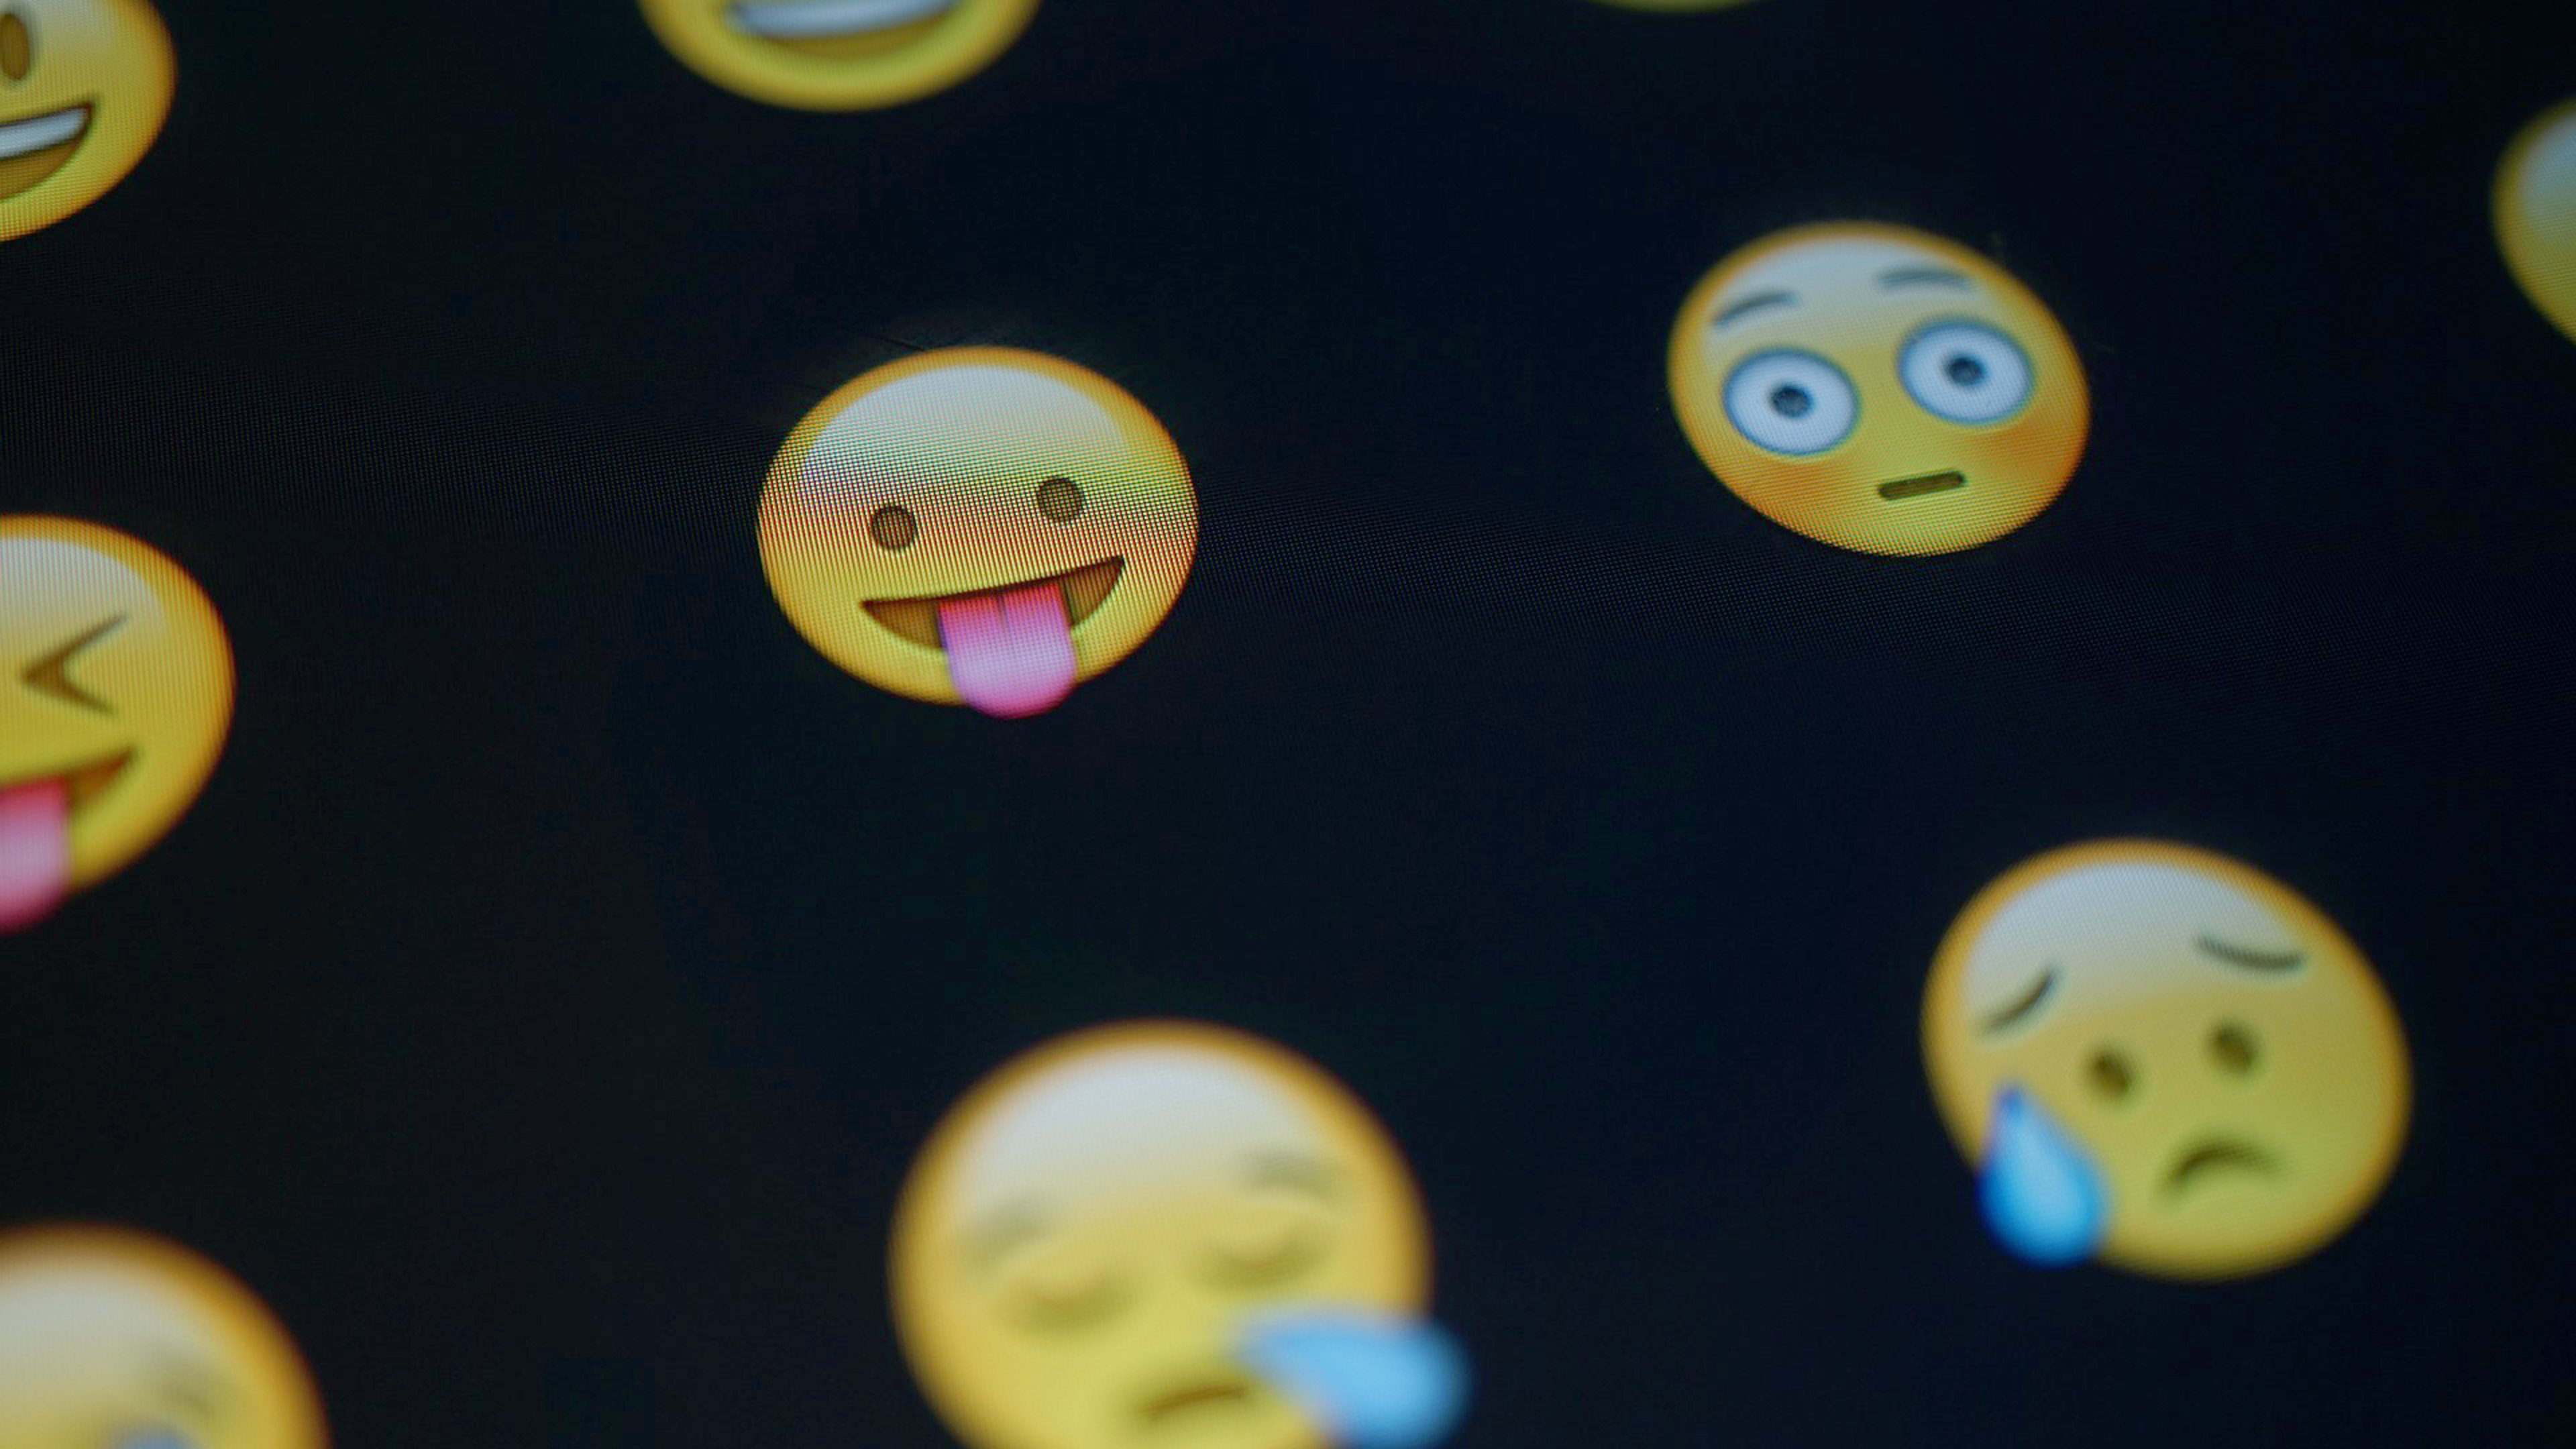 Researchers say an earthquake emoji could save lives